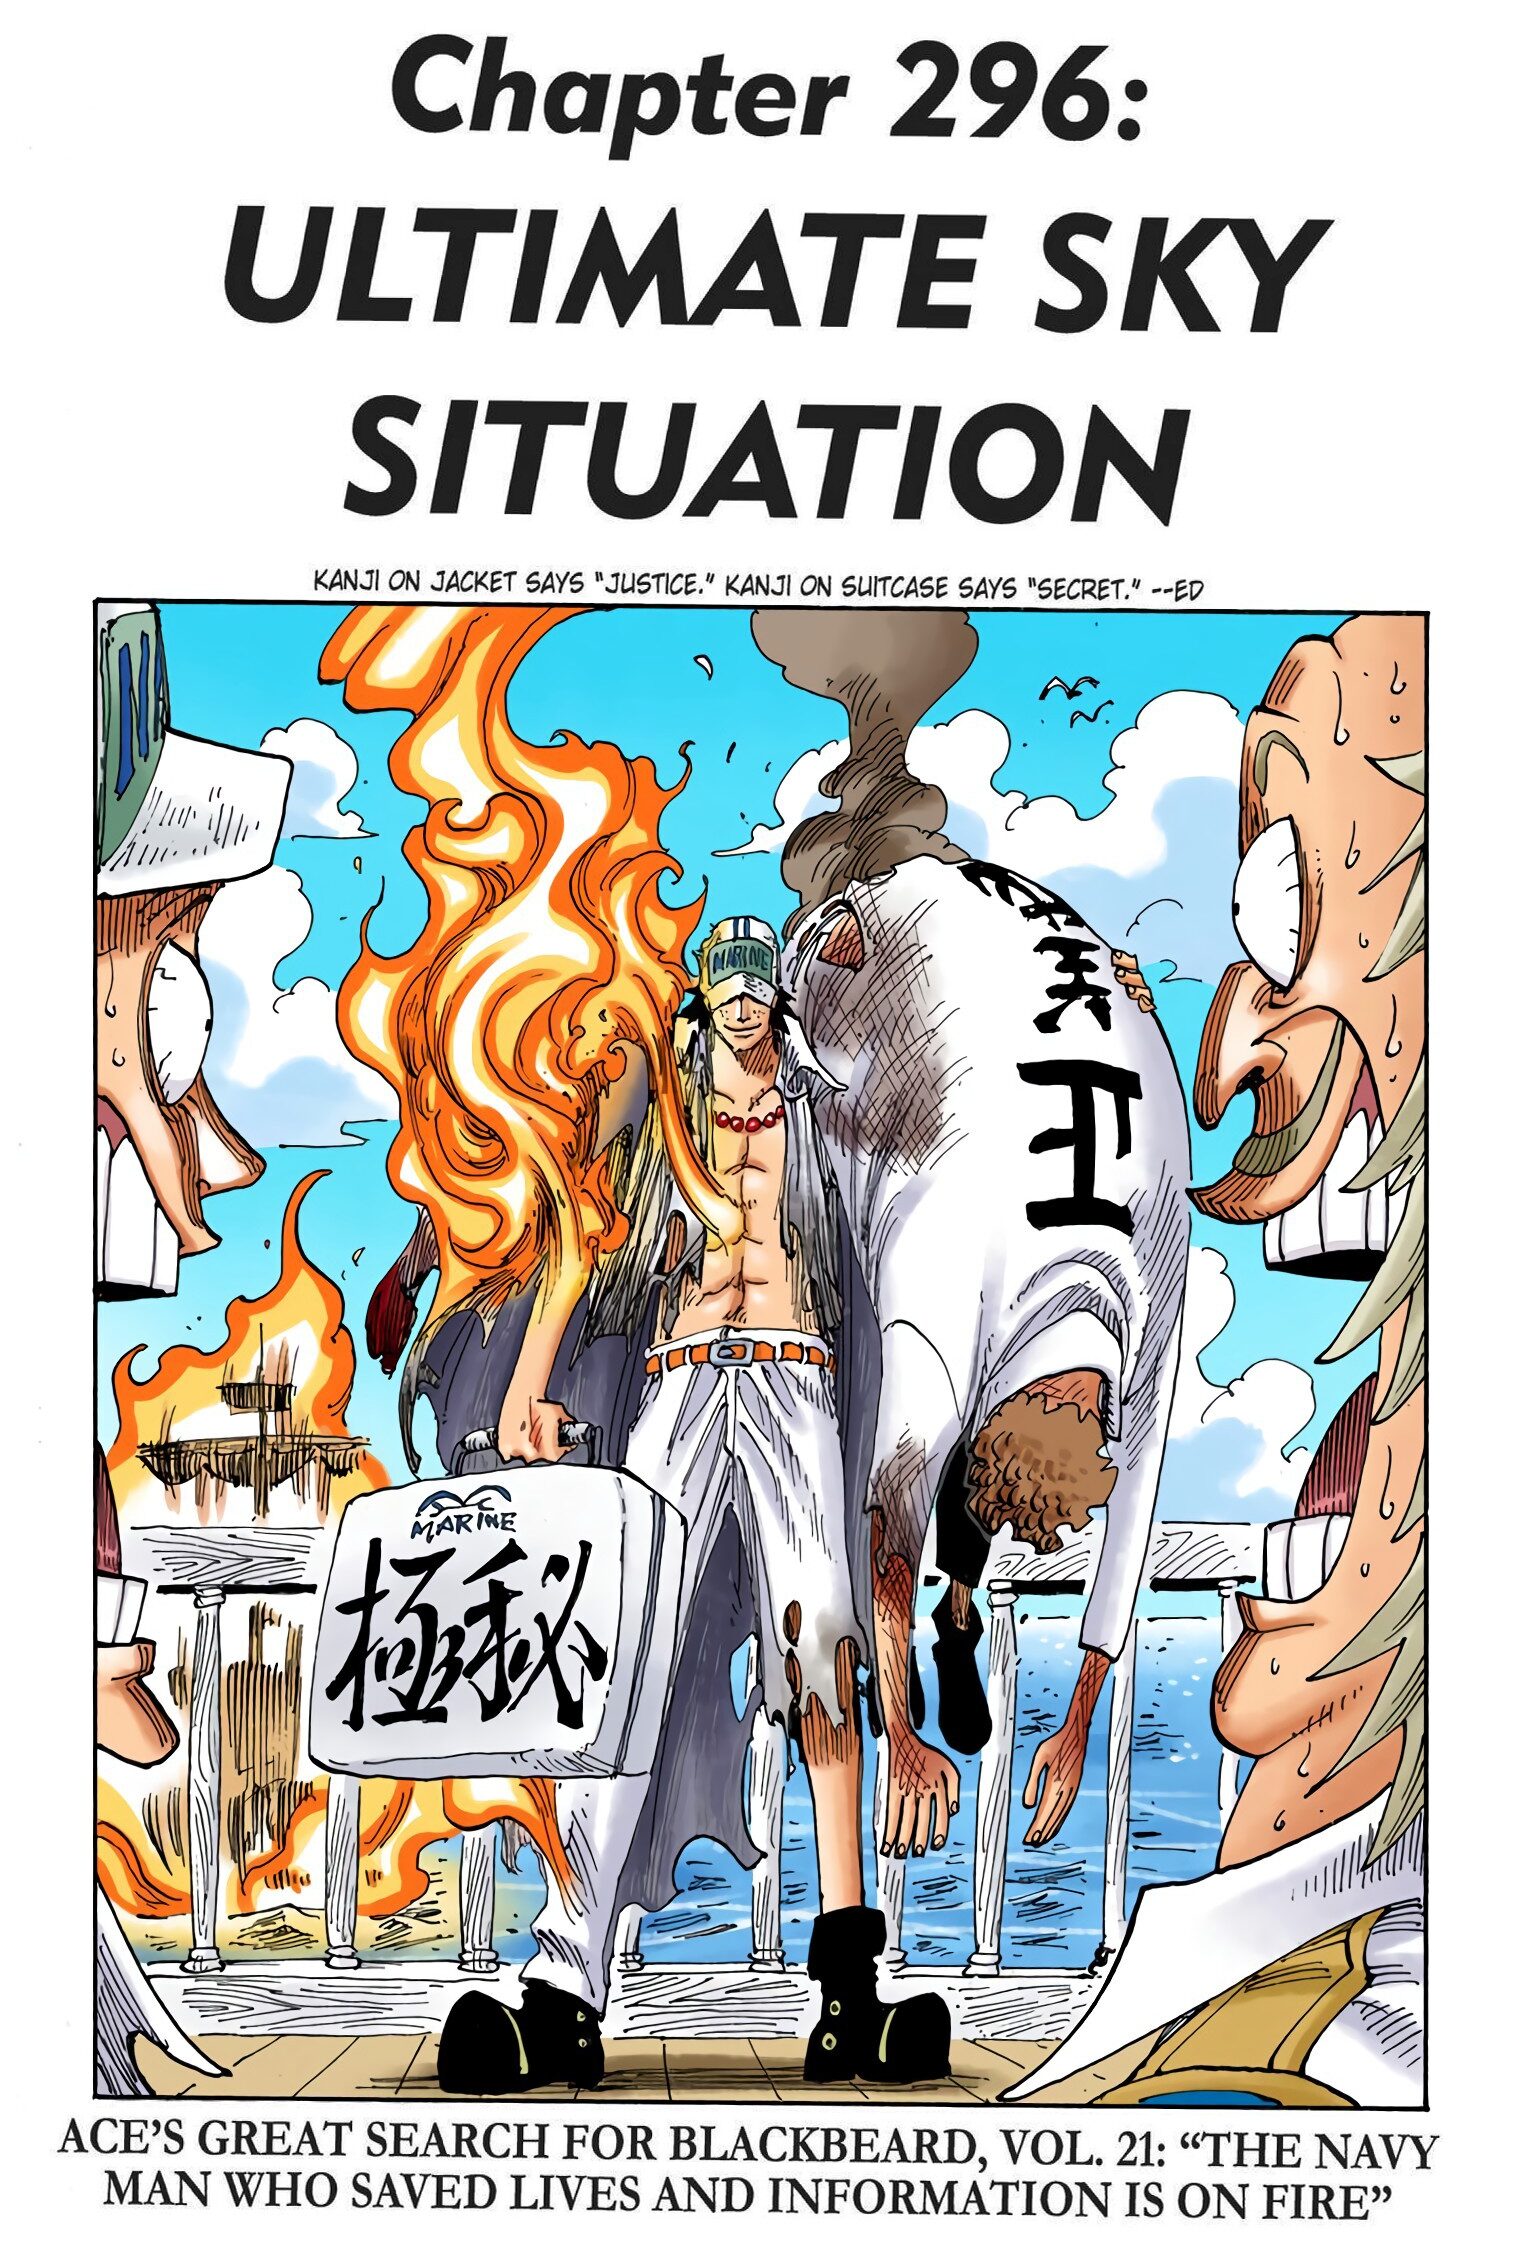 Portgas D. Ace accidentally gives away his identity on Eiichiro Oda's cover story to One Piece Chapter 296 "Ultimate Sky Situation" (2003), Shueisha